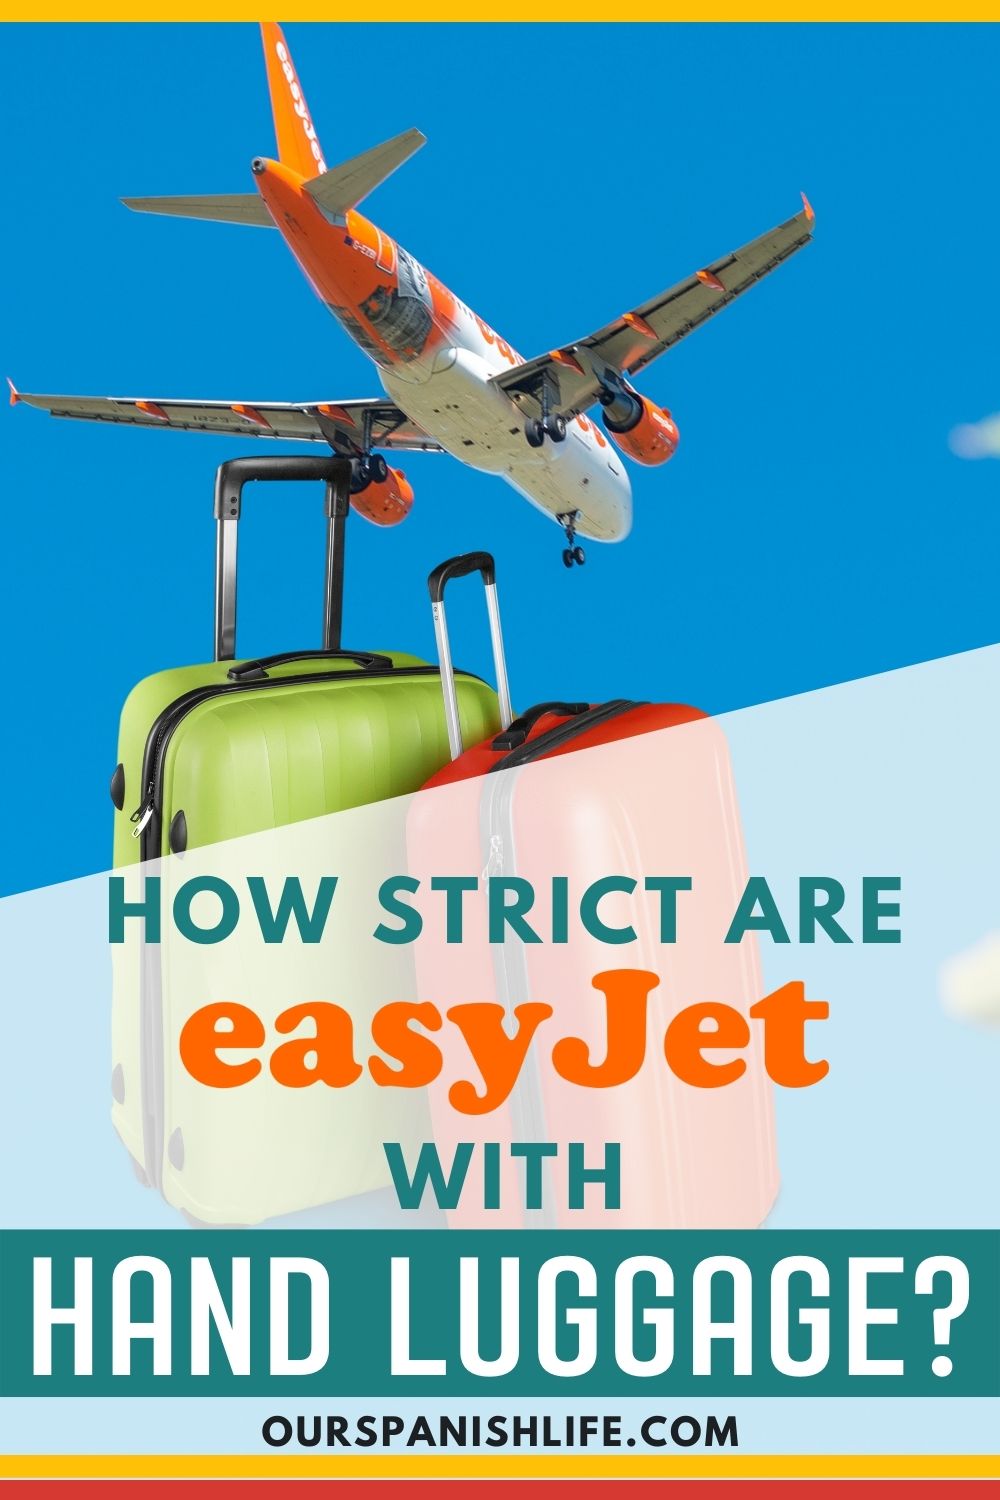 Photo showing an airplane flying and two luggage below it with text overlay that reads How strict are easyJet with hand luggage